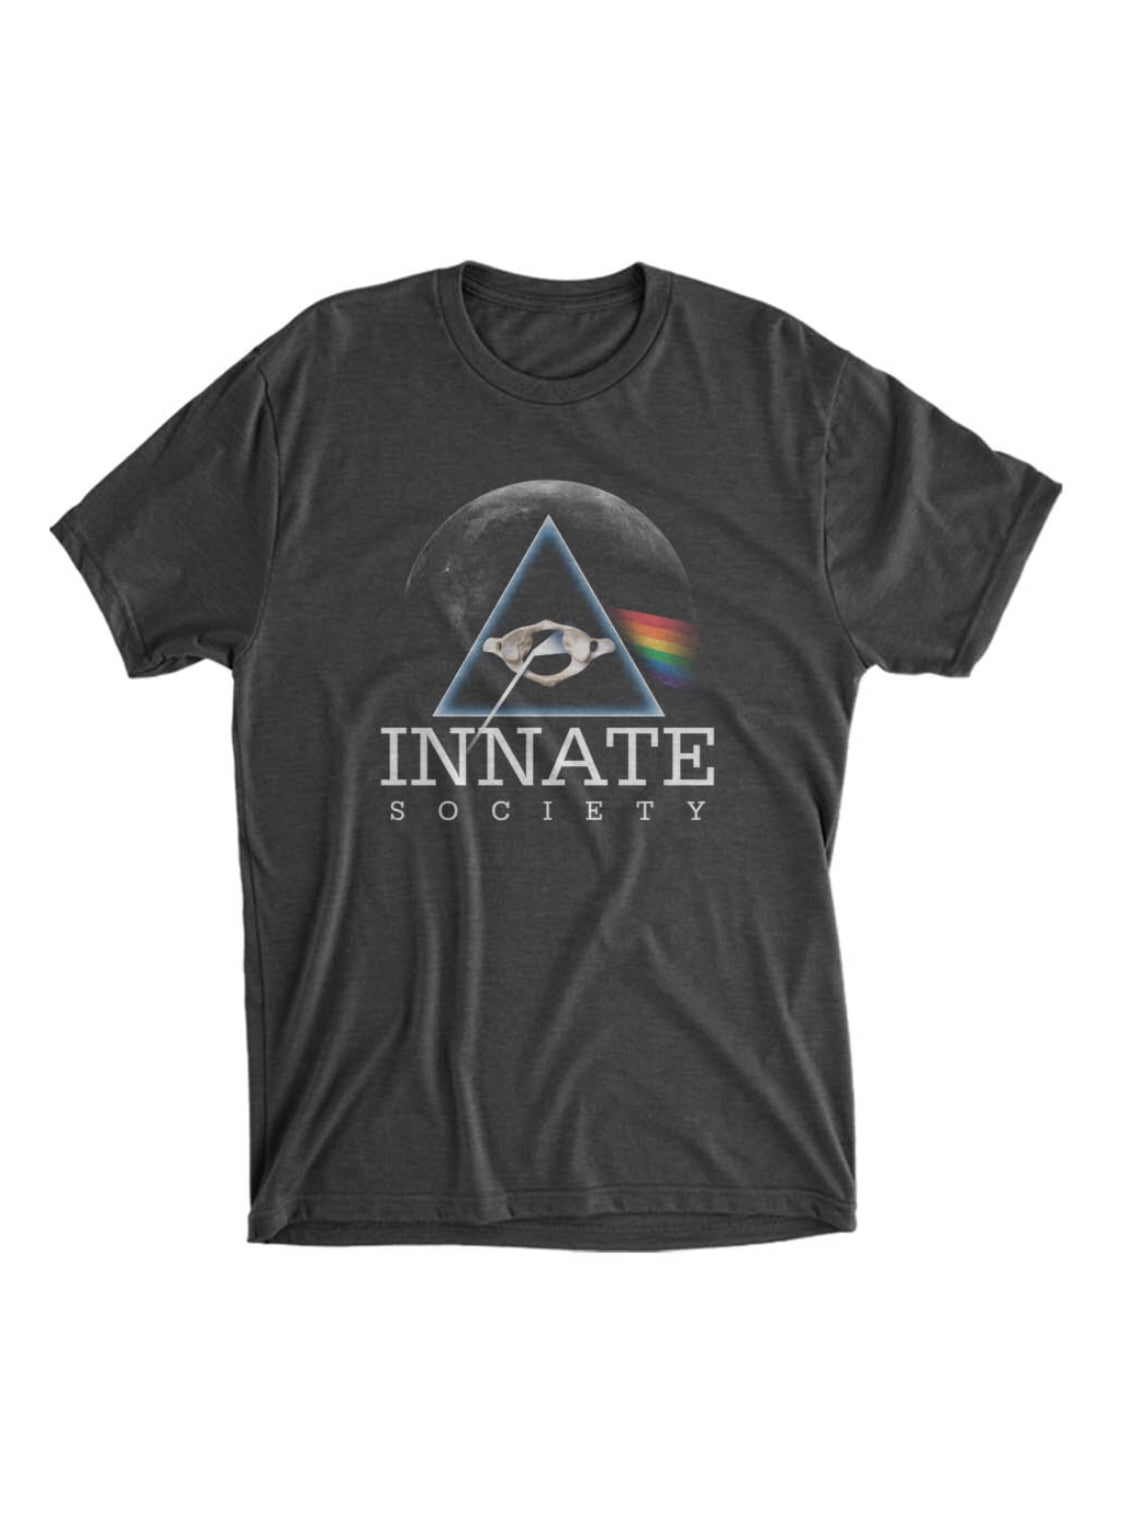 Prism T-Shirt in Charcoal Grey